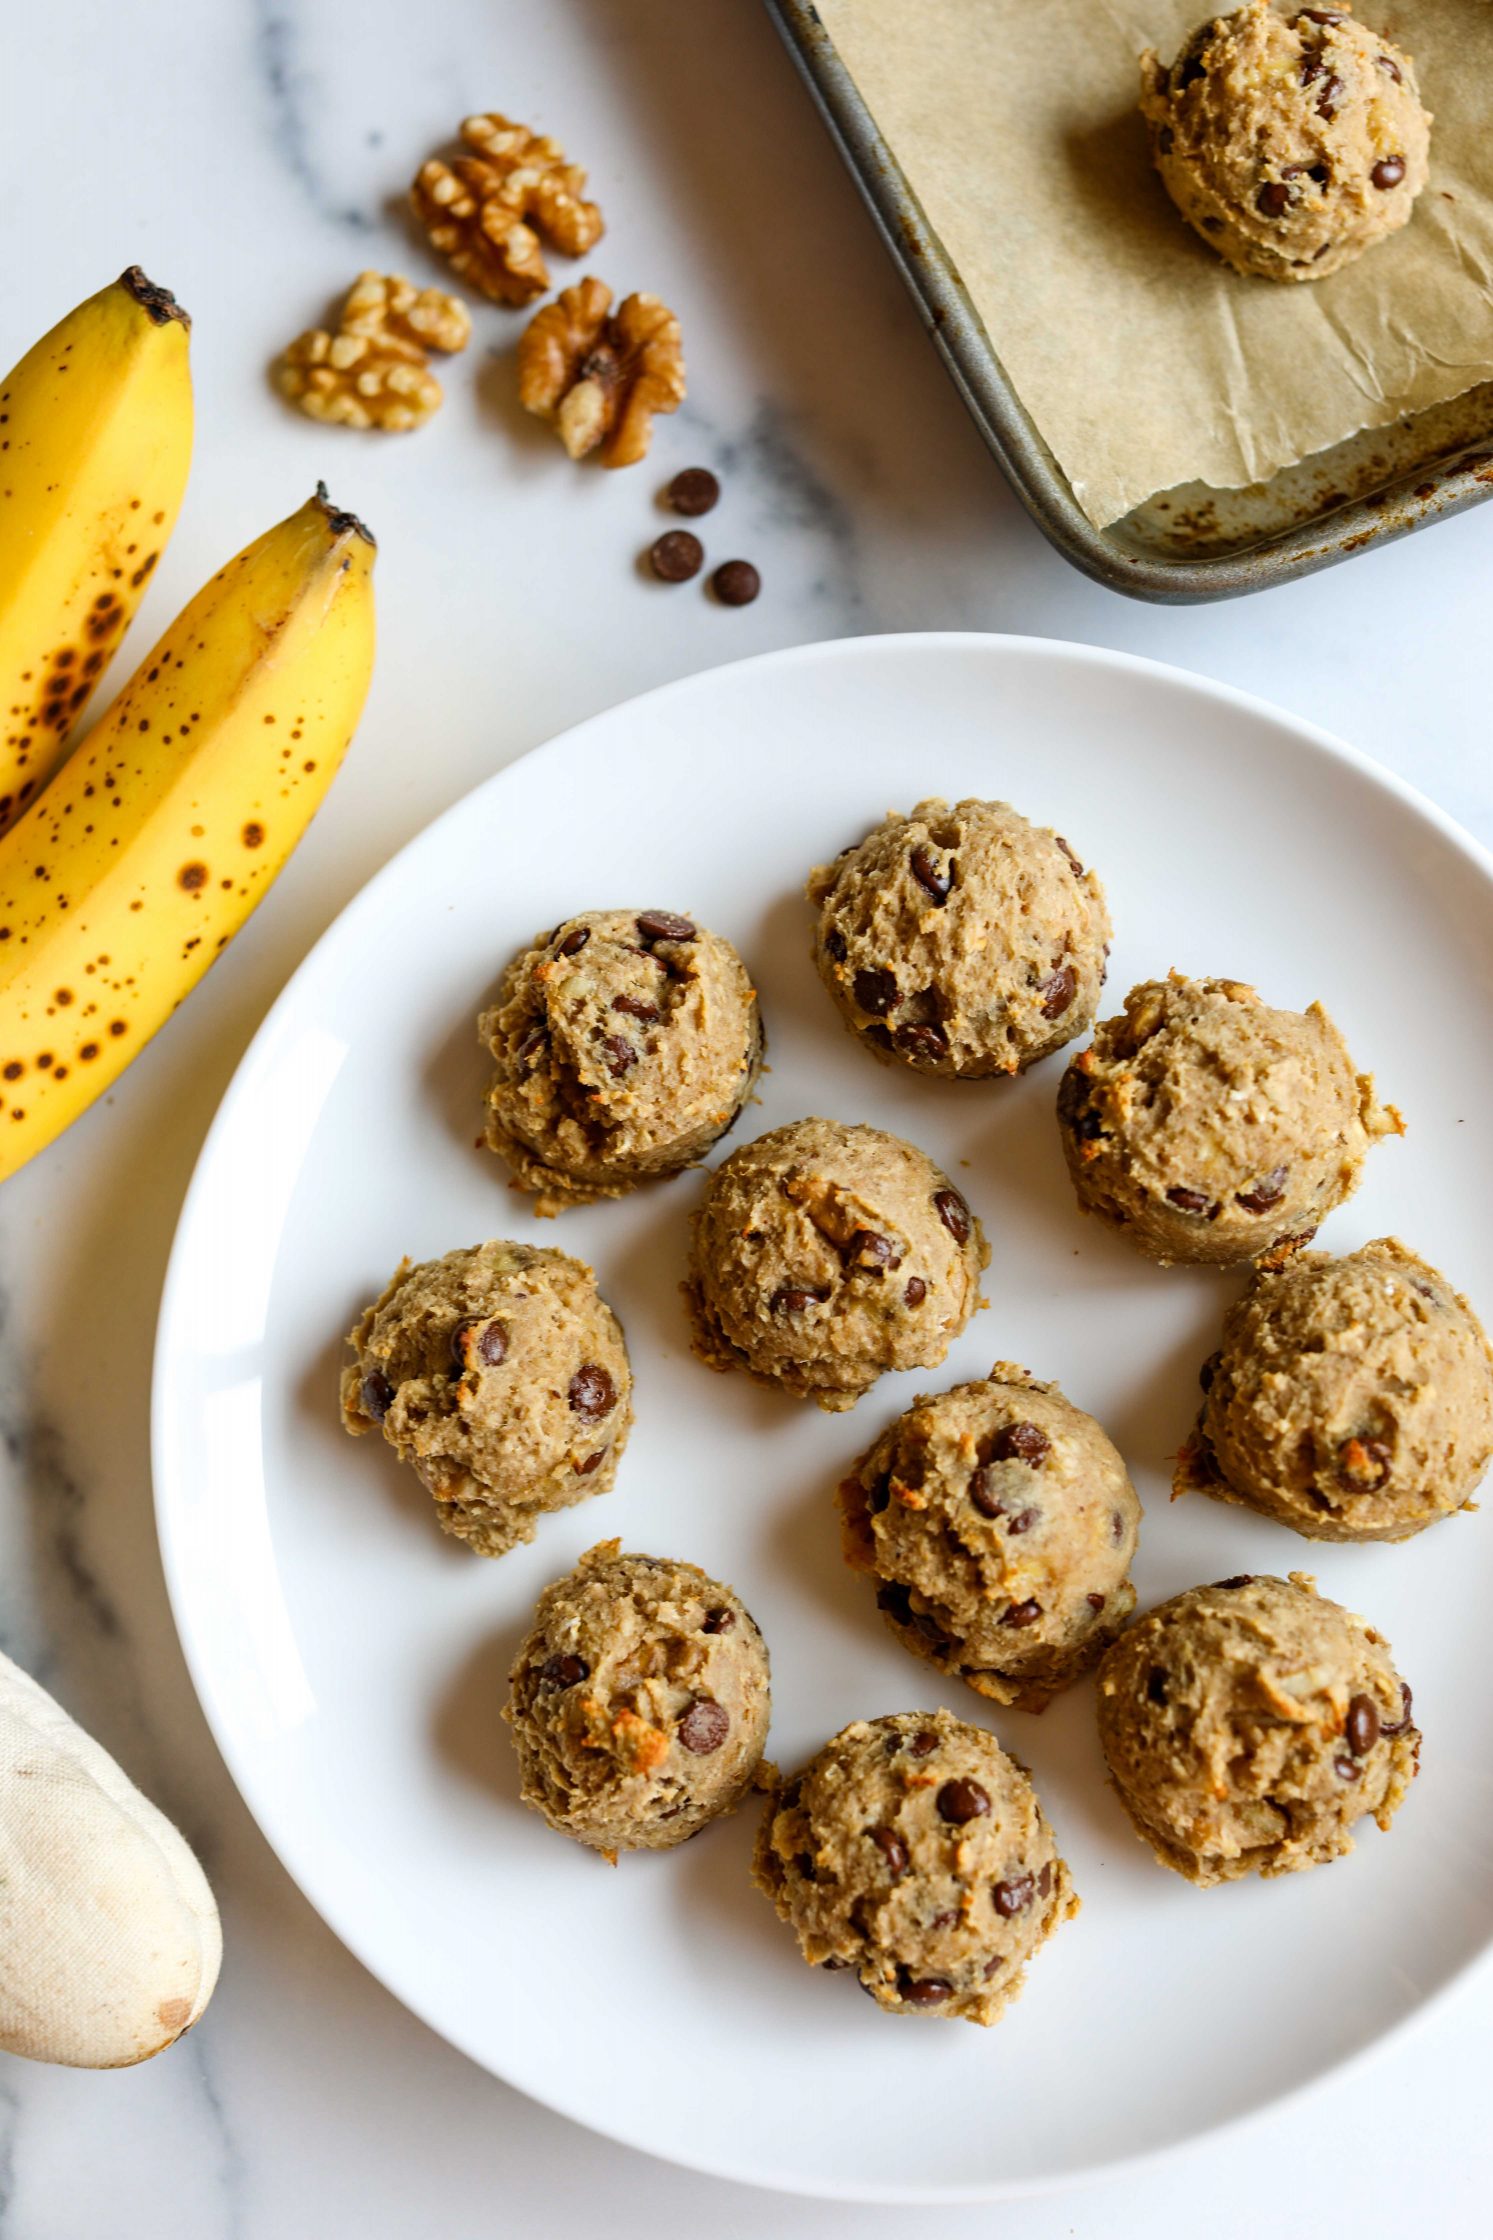 Banana Walnut Chocolate Chip Protein Cookies served on a plate with bananas on the side by Flora & Vino